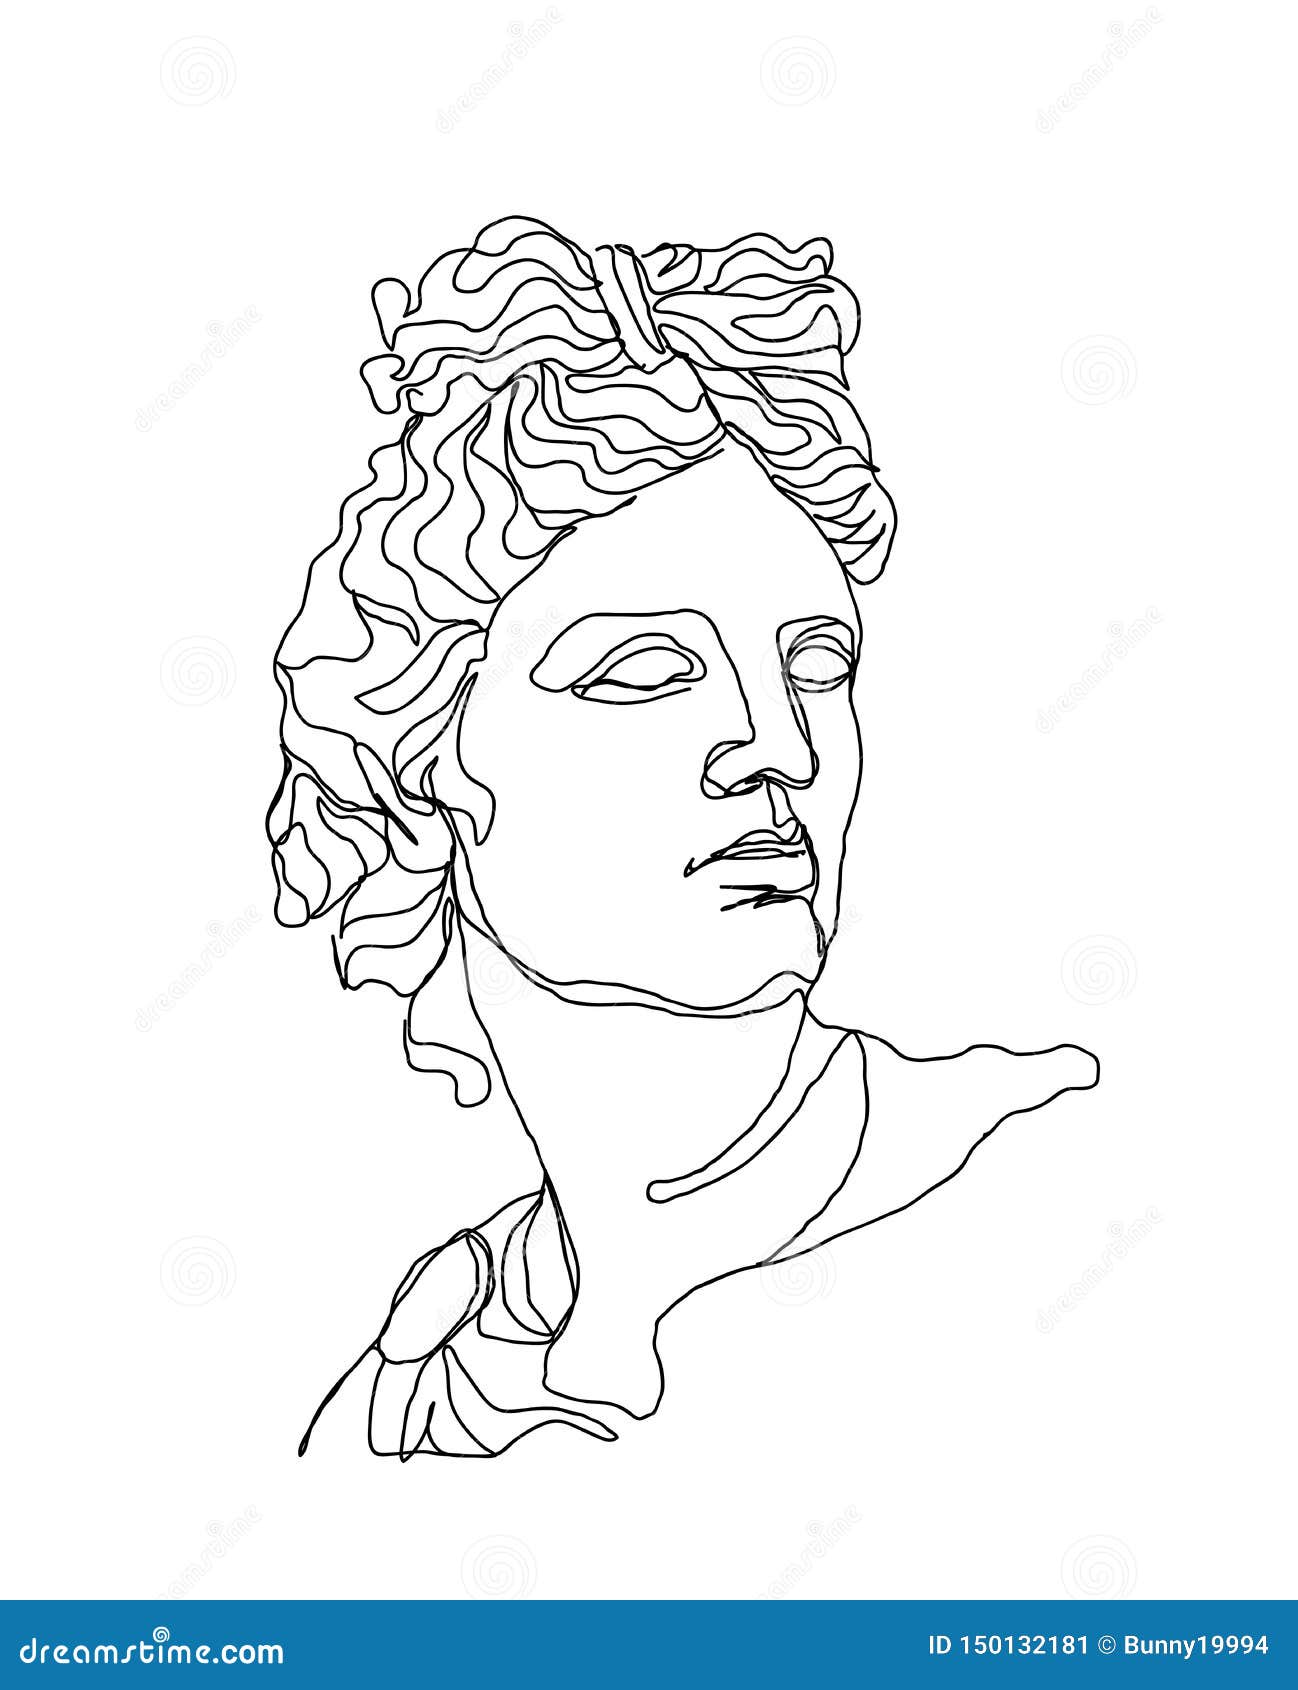 one line drawing skech. apollo sculpture.modern single line art, aesthetic contour. perfect for home decor such as posters